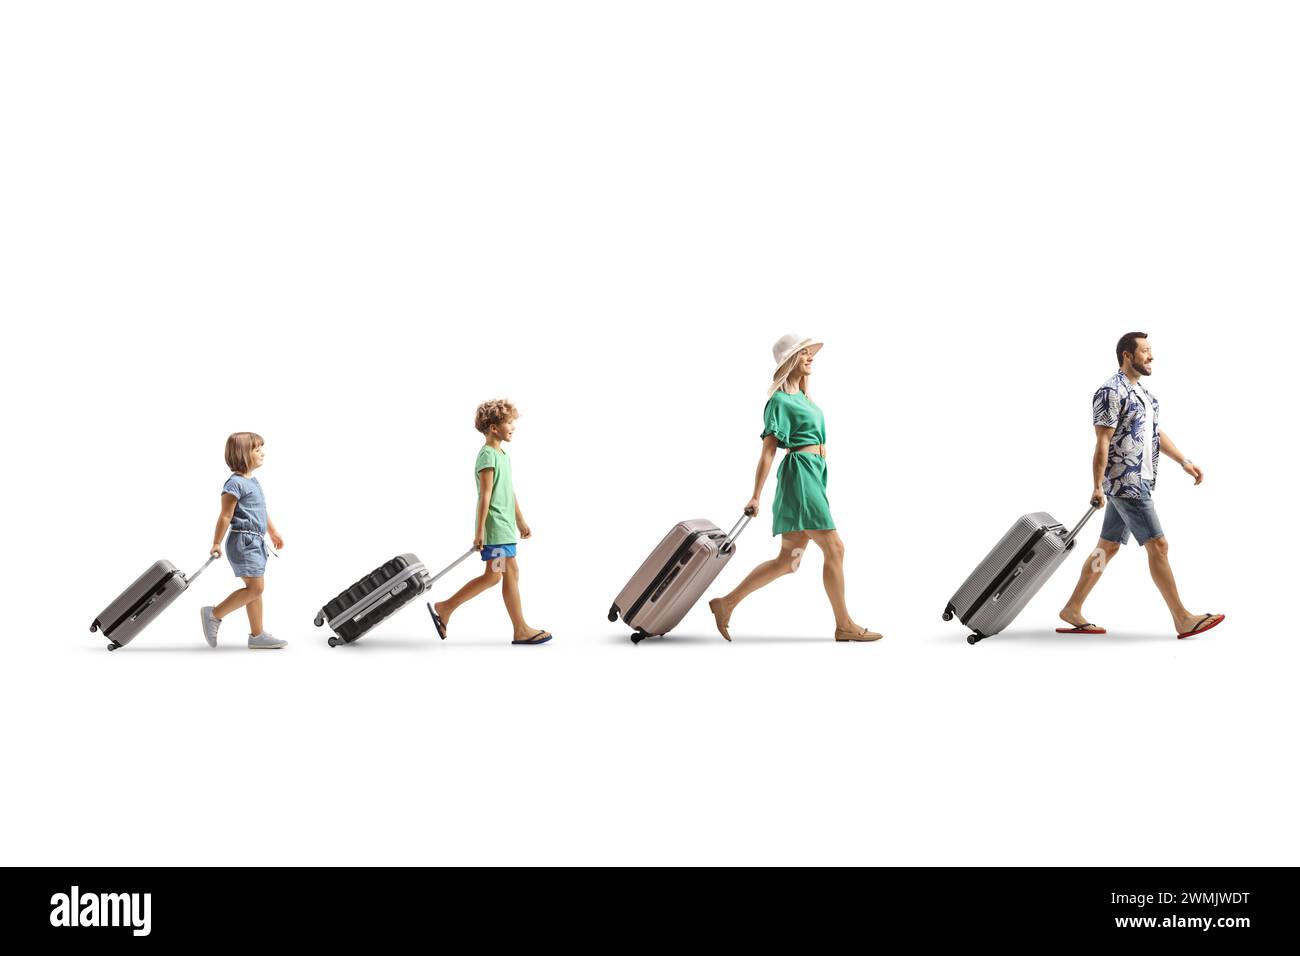 Family with children walking and pulling suitcases isolated on white background Stock Photo